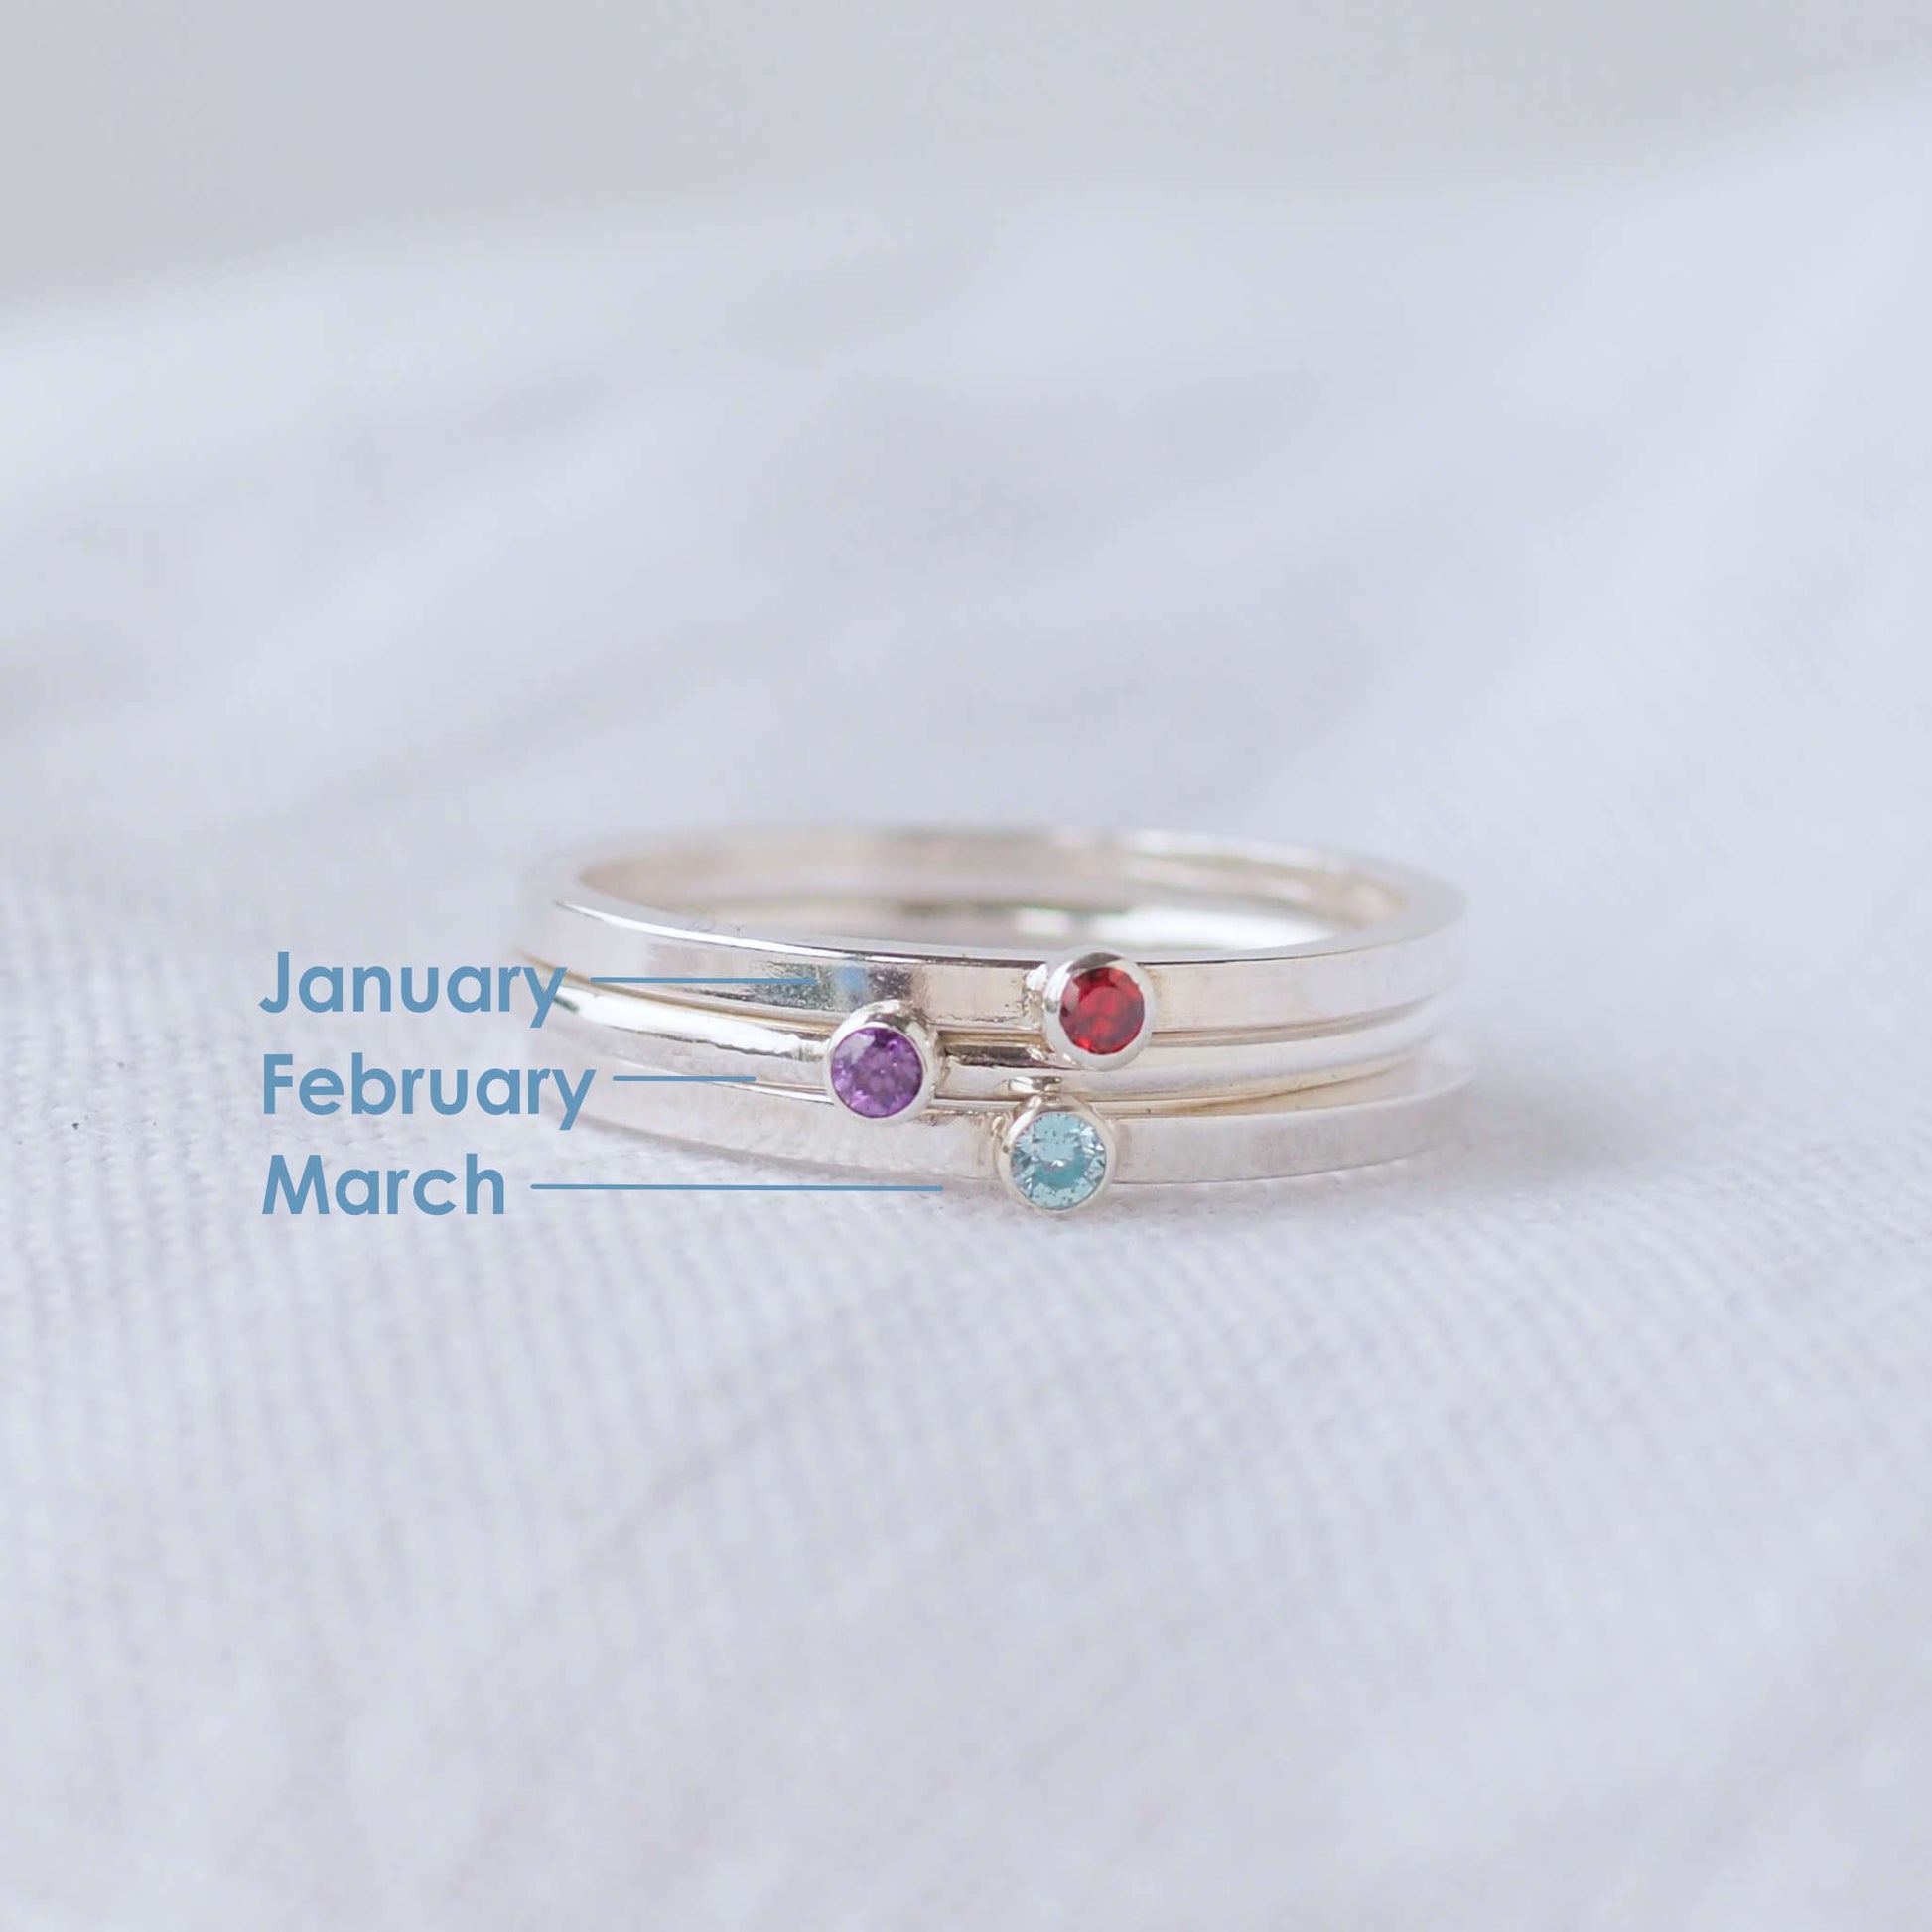 Three silver rings showing January, February and March Birthstones. The rings are simple silver bands with a miniature birthstone on the band in red, purple and aqua cubic zirconia. Handmade in Edinburgh by maram jewellery